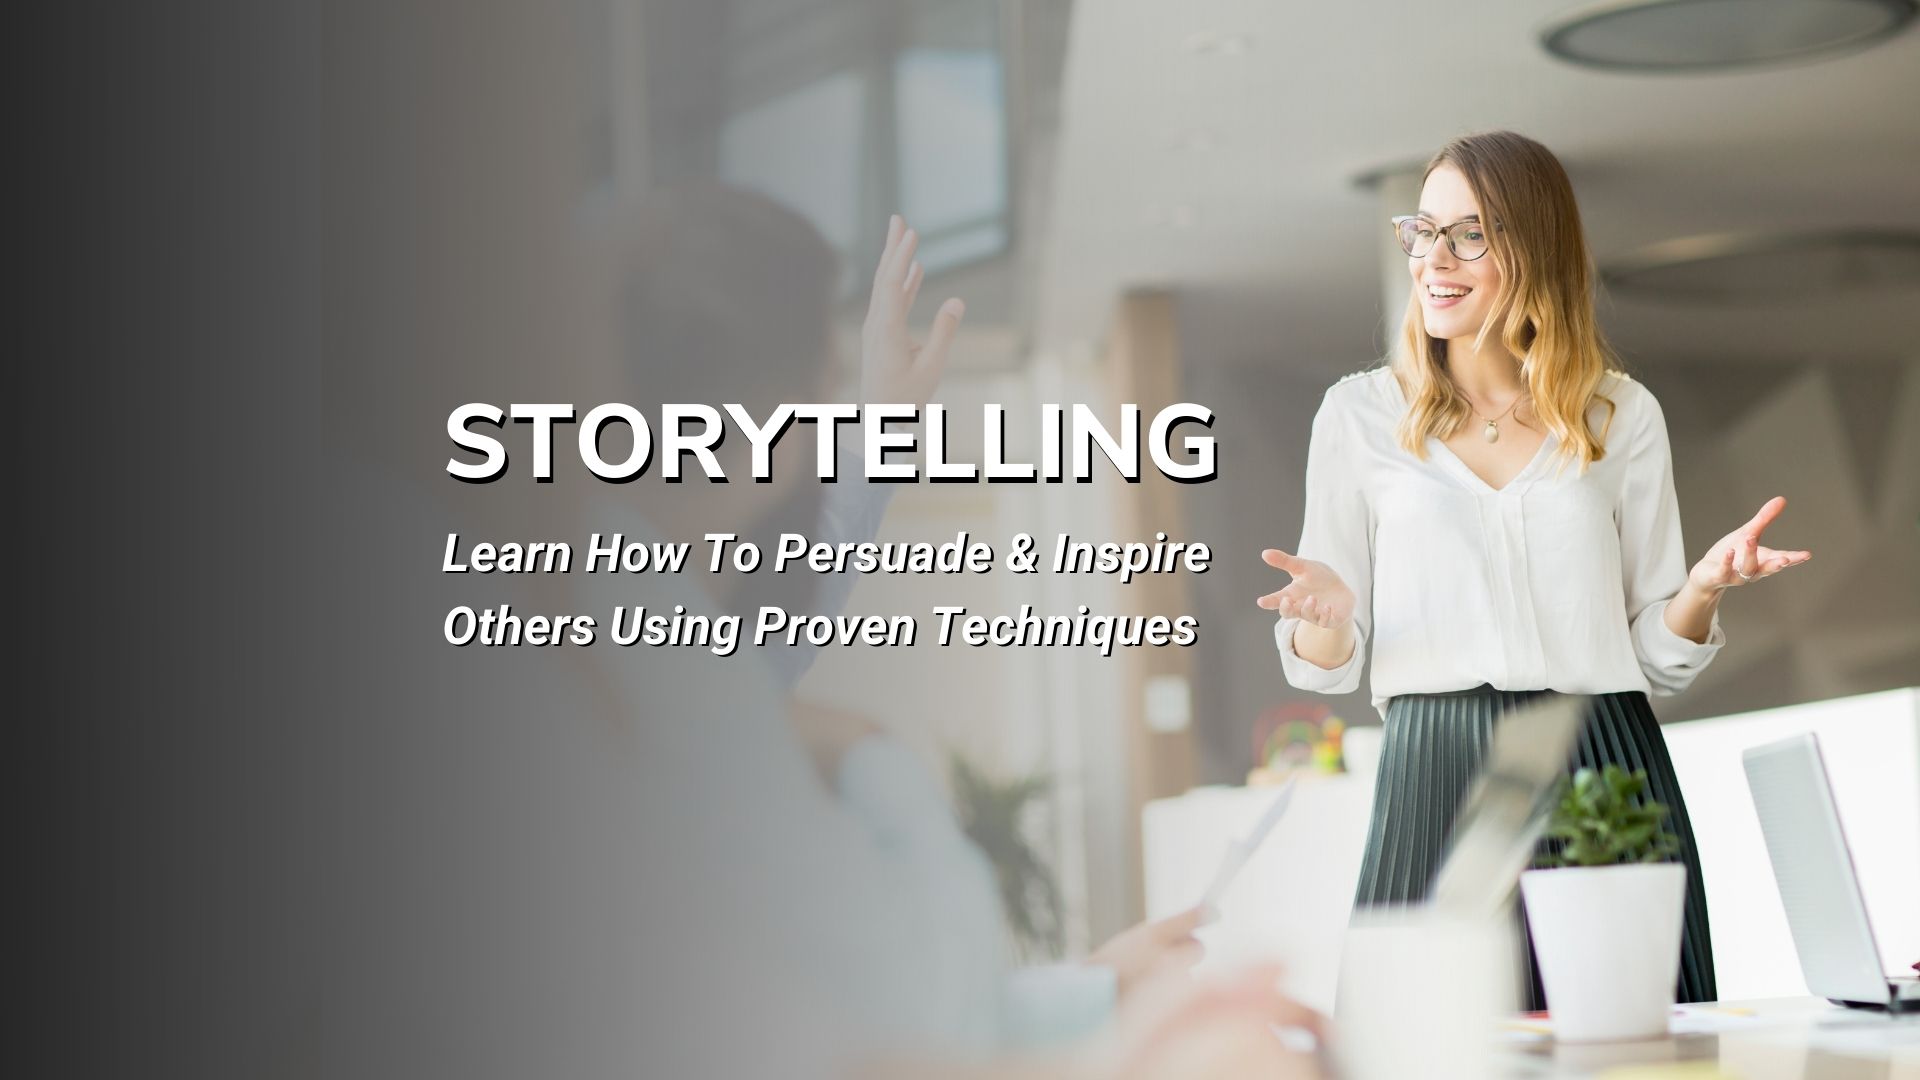 Business Storytelling - Live Online Class, Online Event